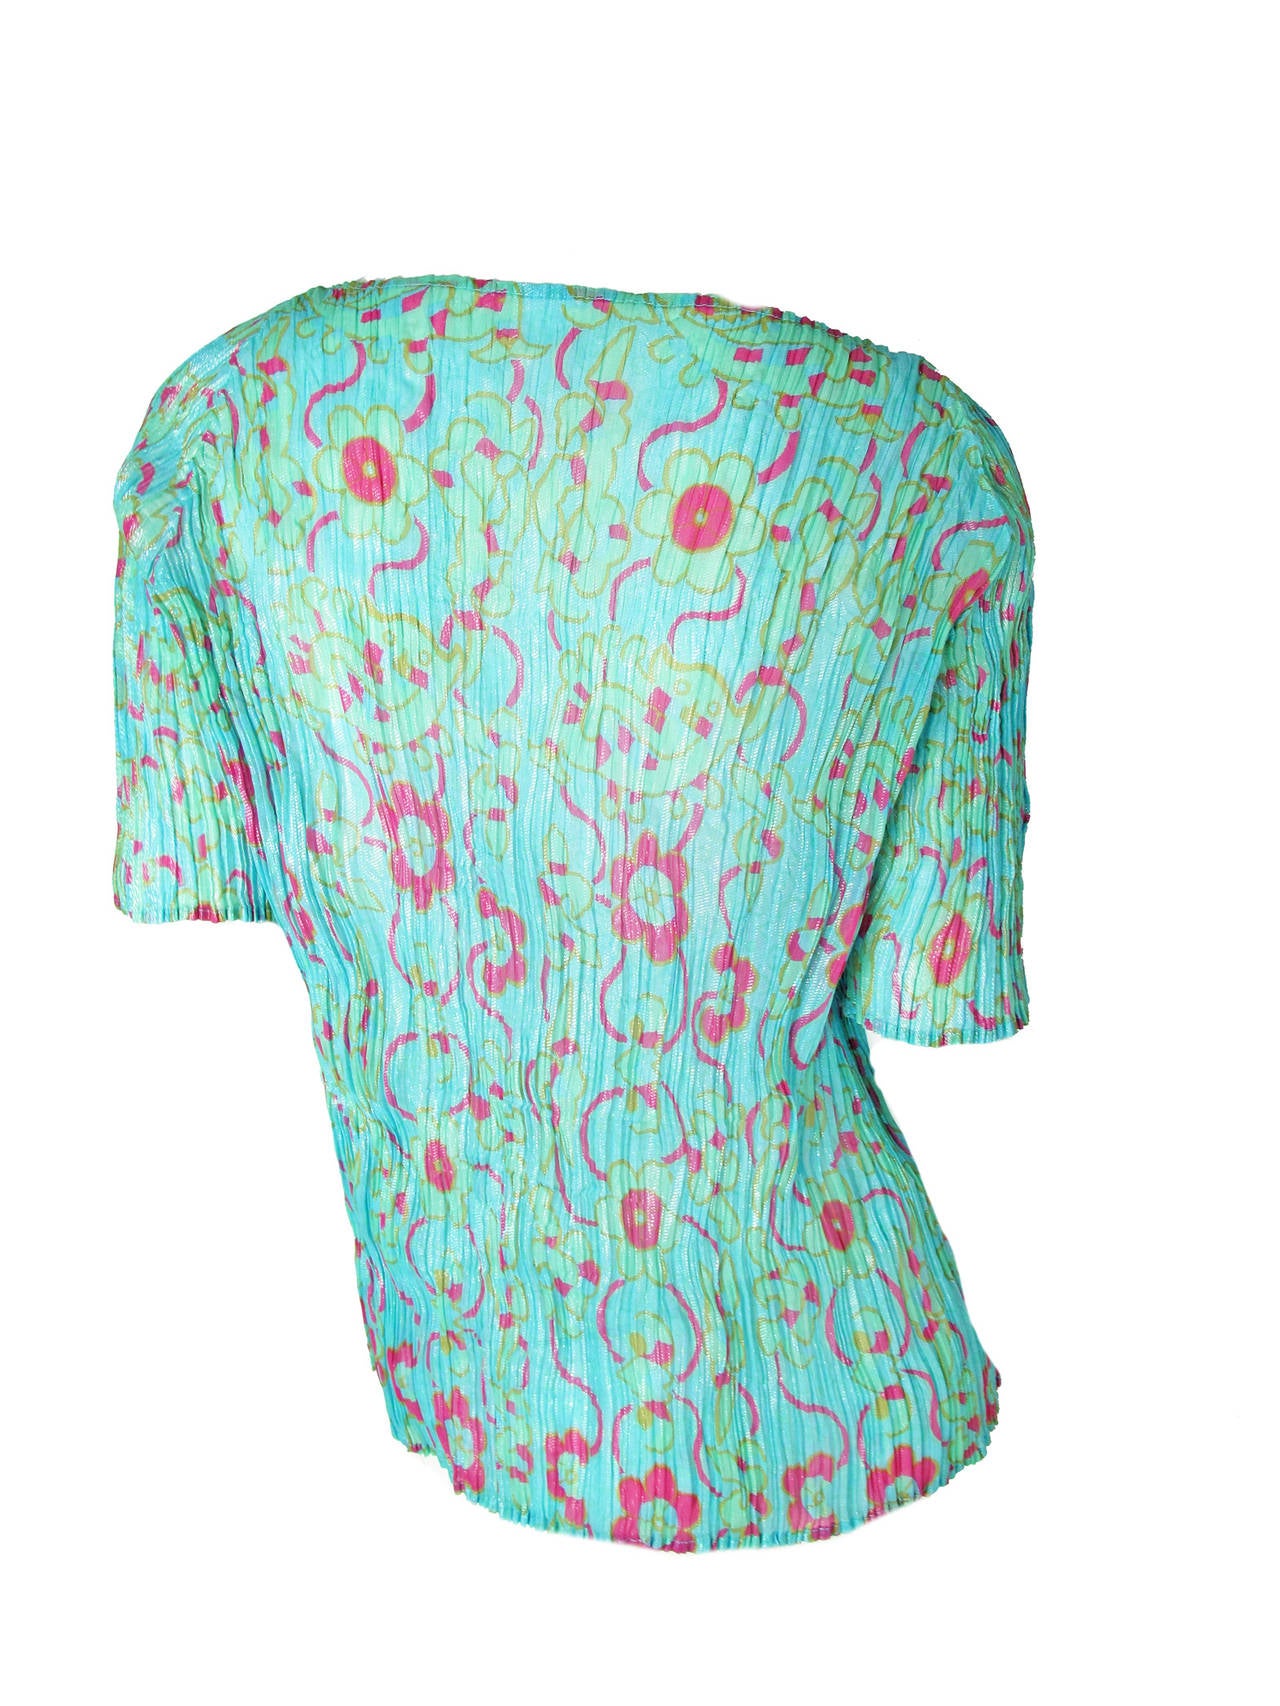 Issey Miyake blue iridescent pleated top with pink and gold floral print. 30